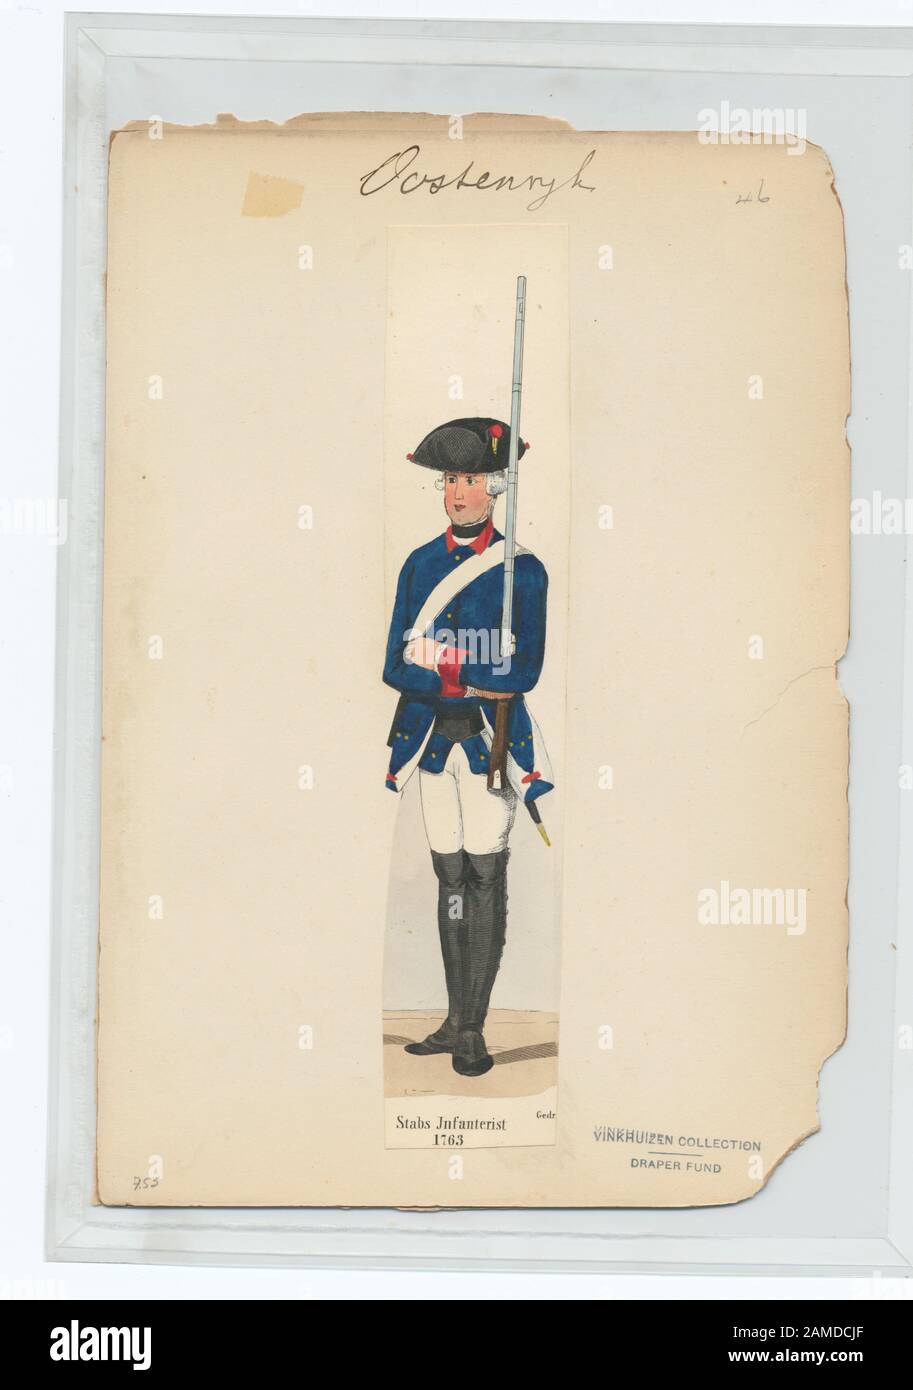 Stabs Infanterist 1763  Ownership : Draper Fund Infantry Staff Corps, 1763  (L'Allemand); Stabs Infanterist. 1763 Stock Photo